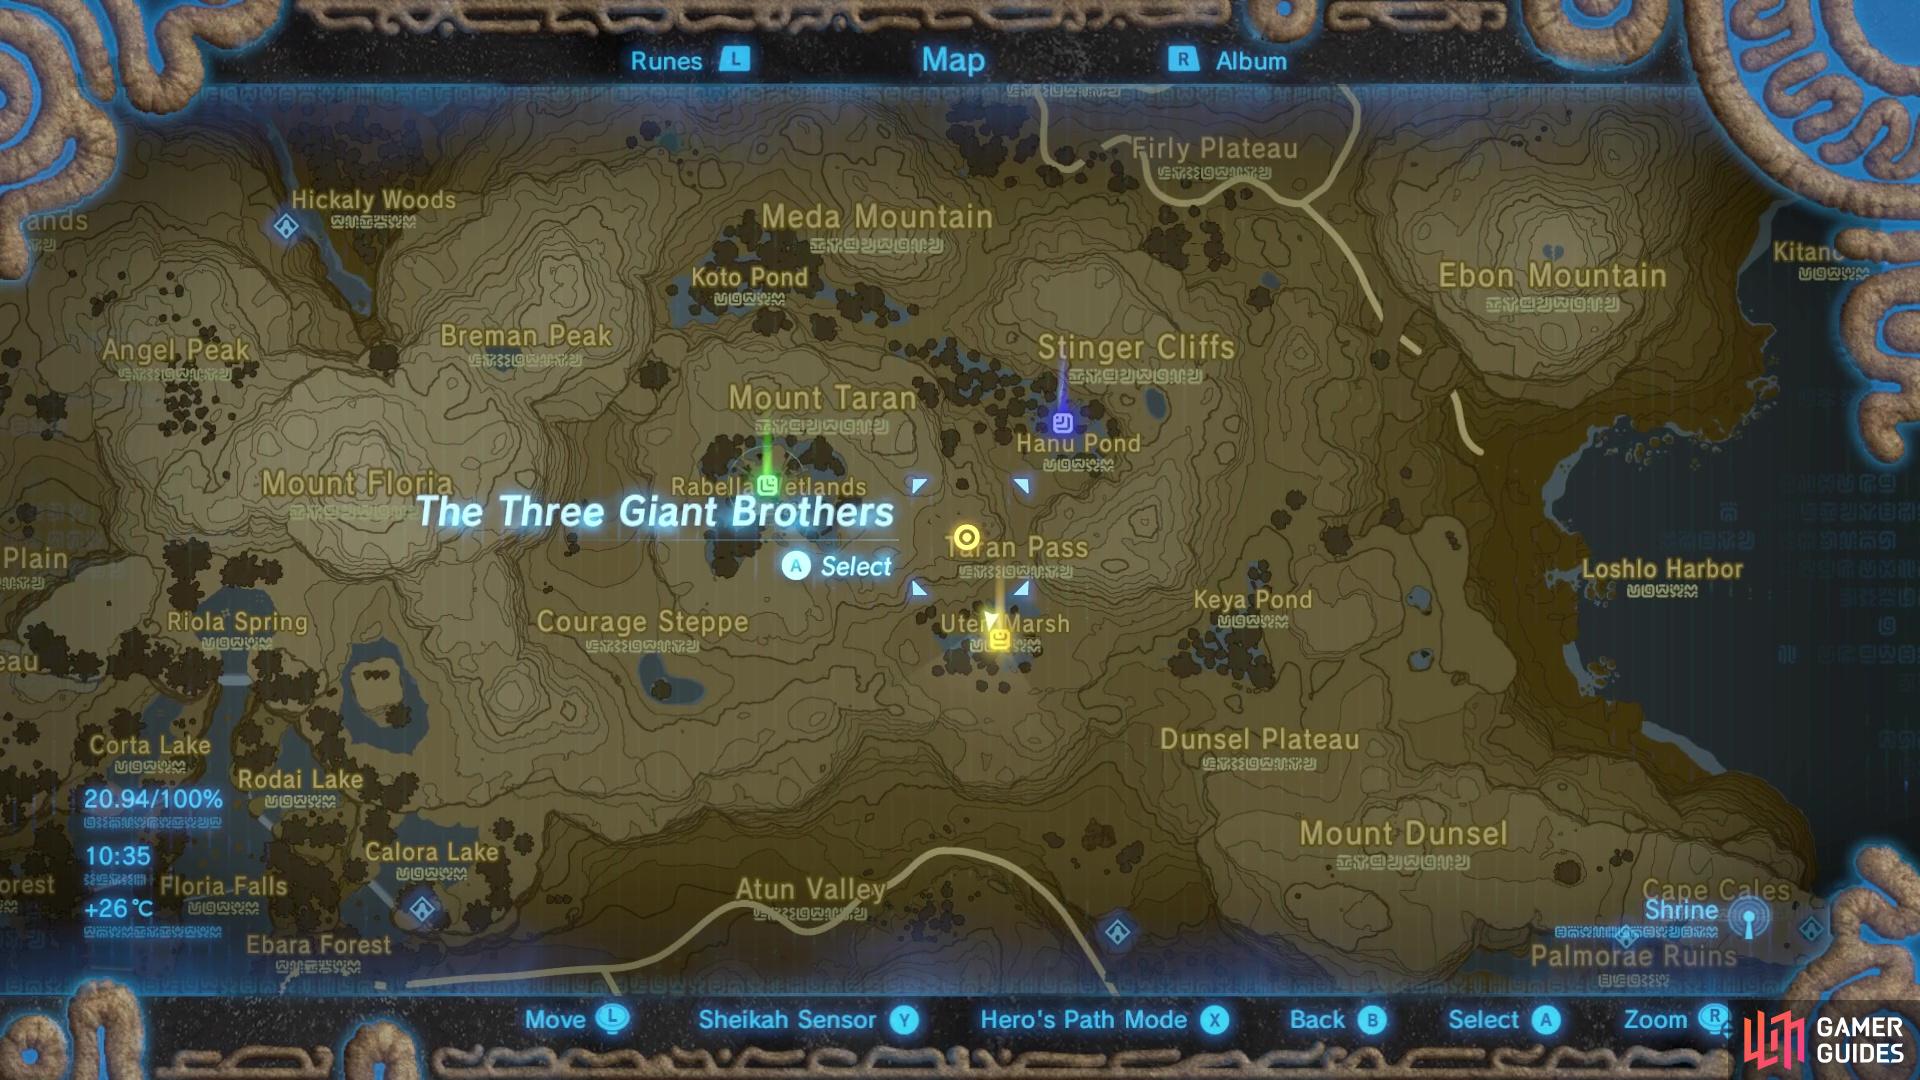 At the center, you'll find the shrine and the other markers indicate where the Hinox brothers are found